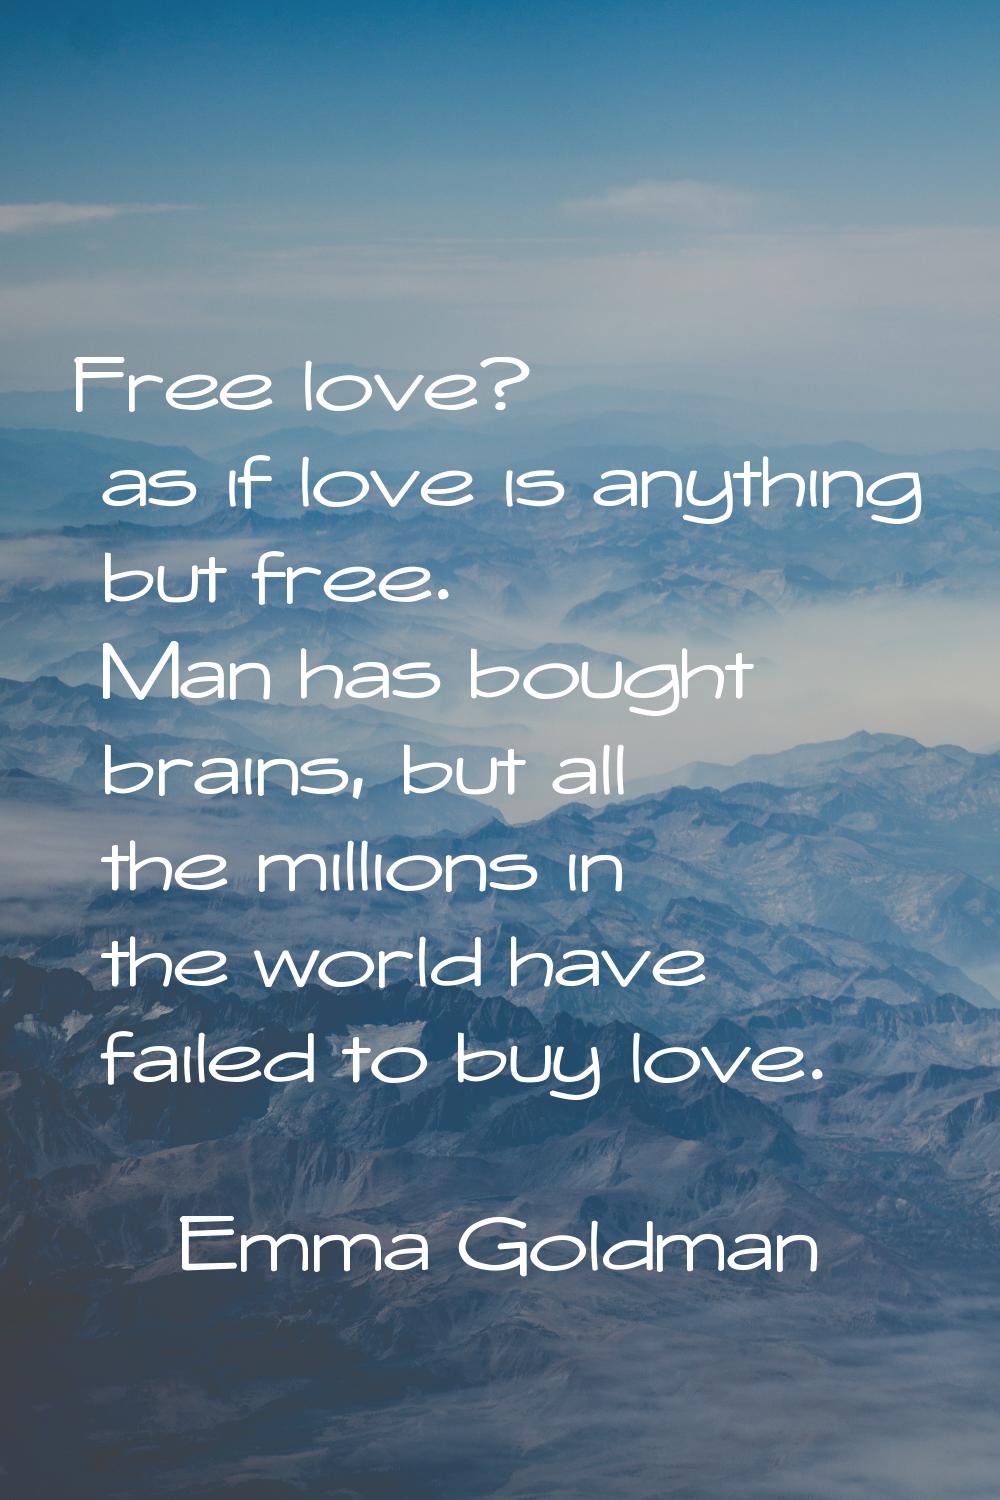 Free love? as if love is anything but free. Man has bought brains, but all the millions in the worl